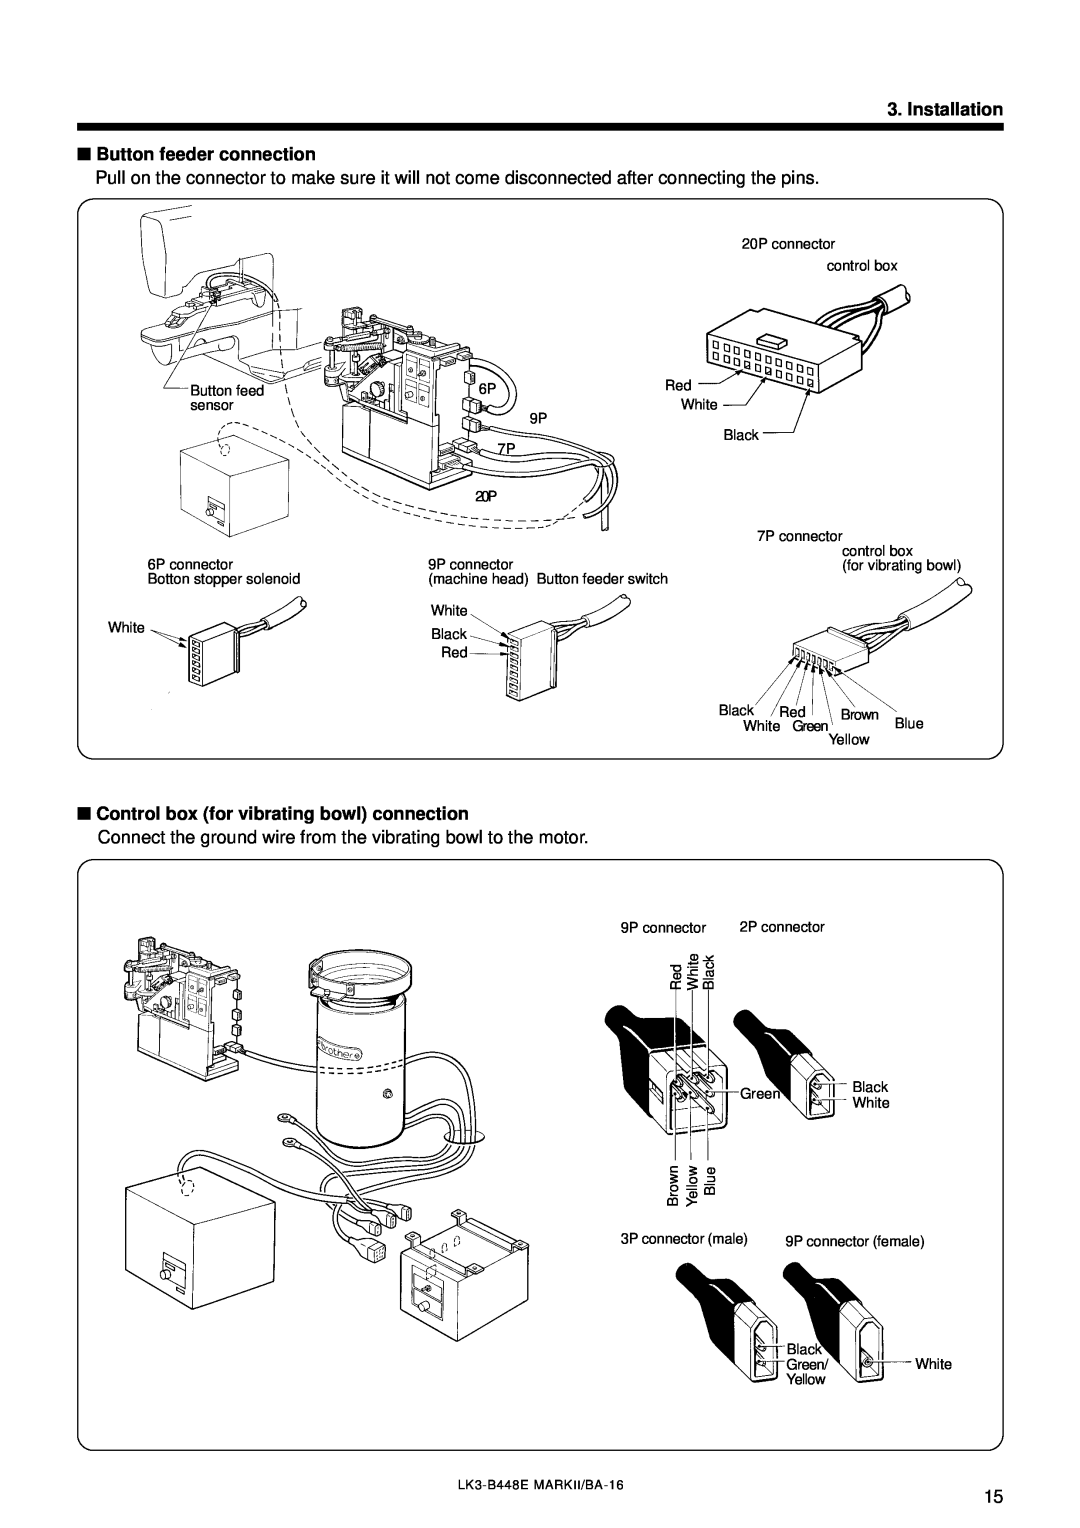 Brother LK3-B448E instruction manual Installation Button feeder connection, Control box for vibrating bowl connection 